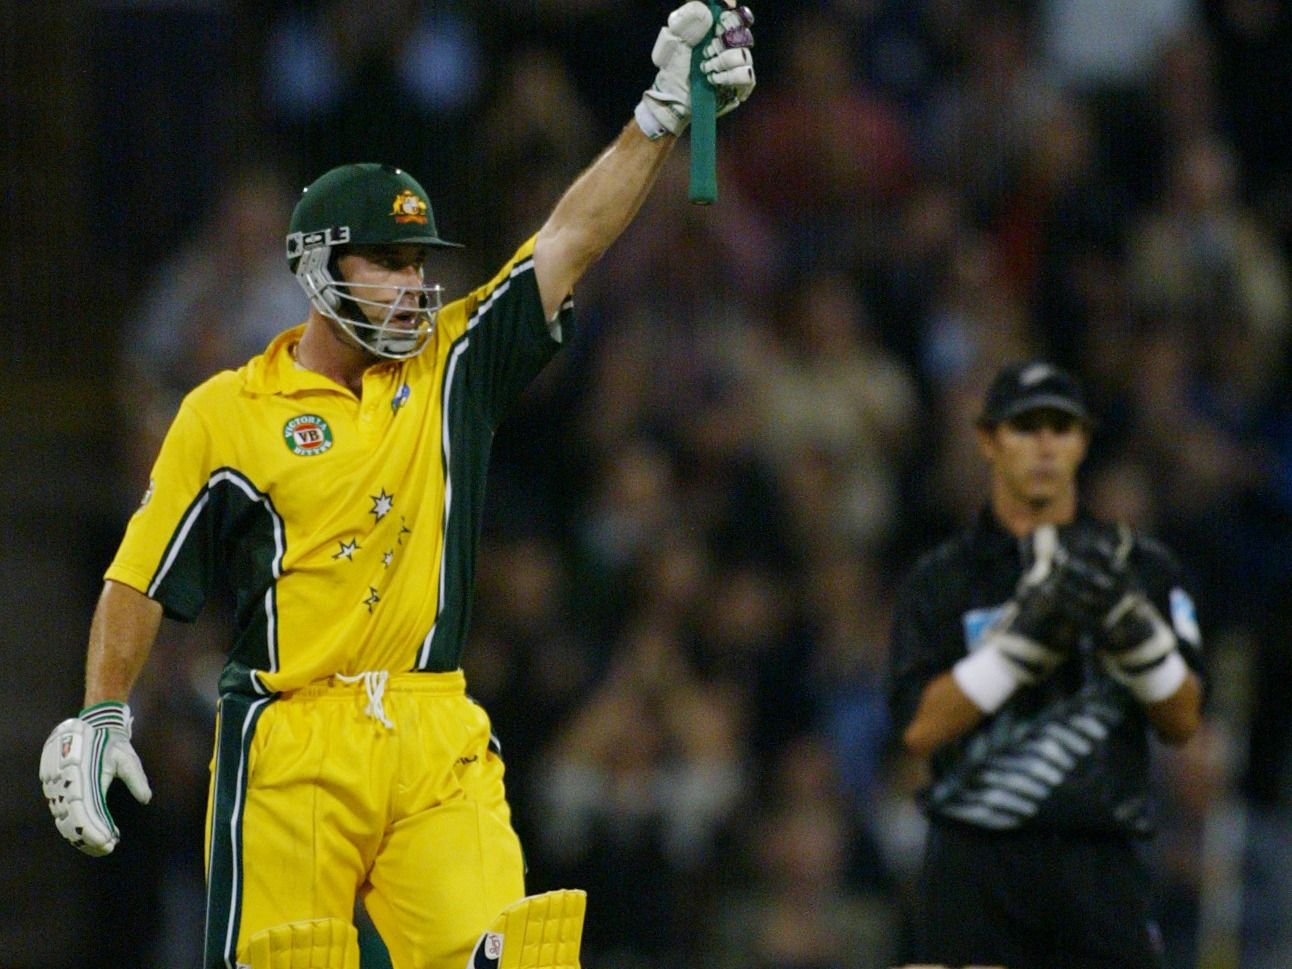 Michael Bevan scored 185* for World XI in April 2000